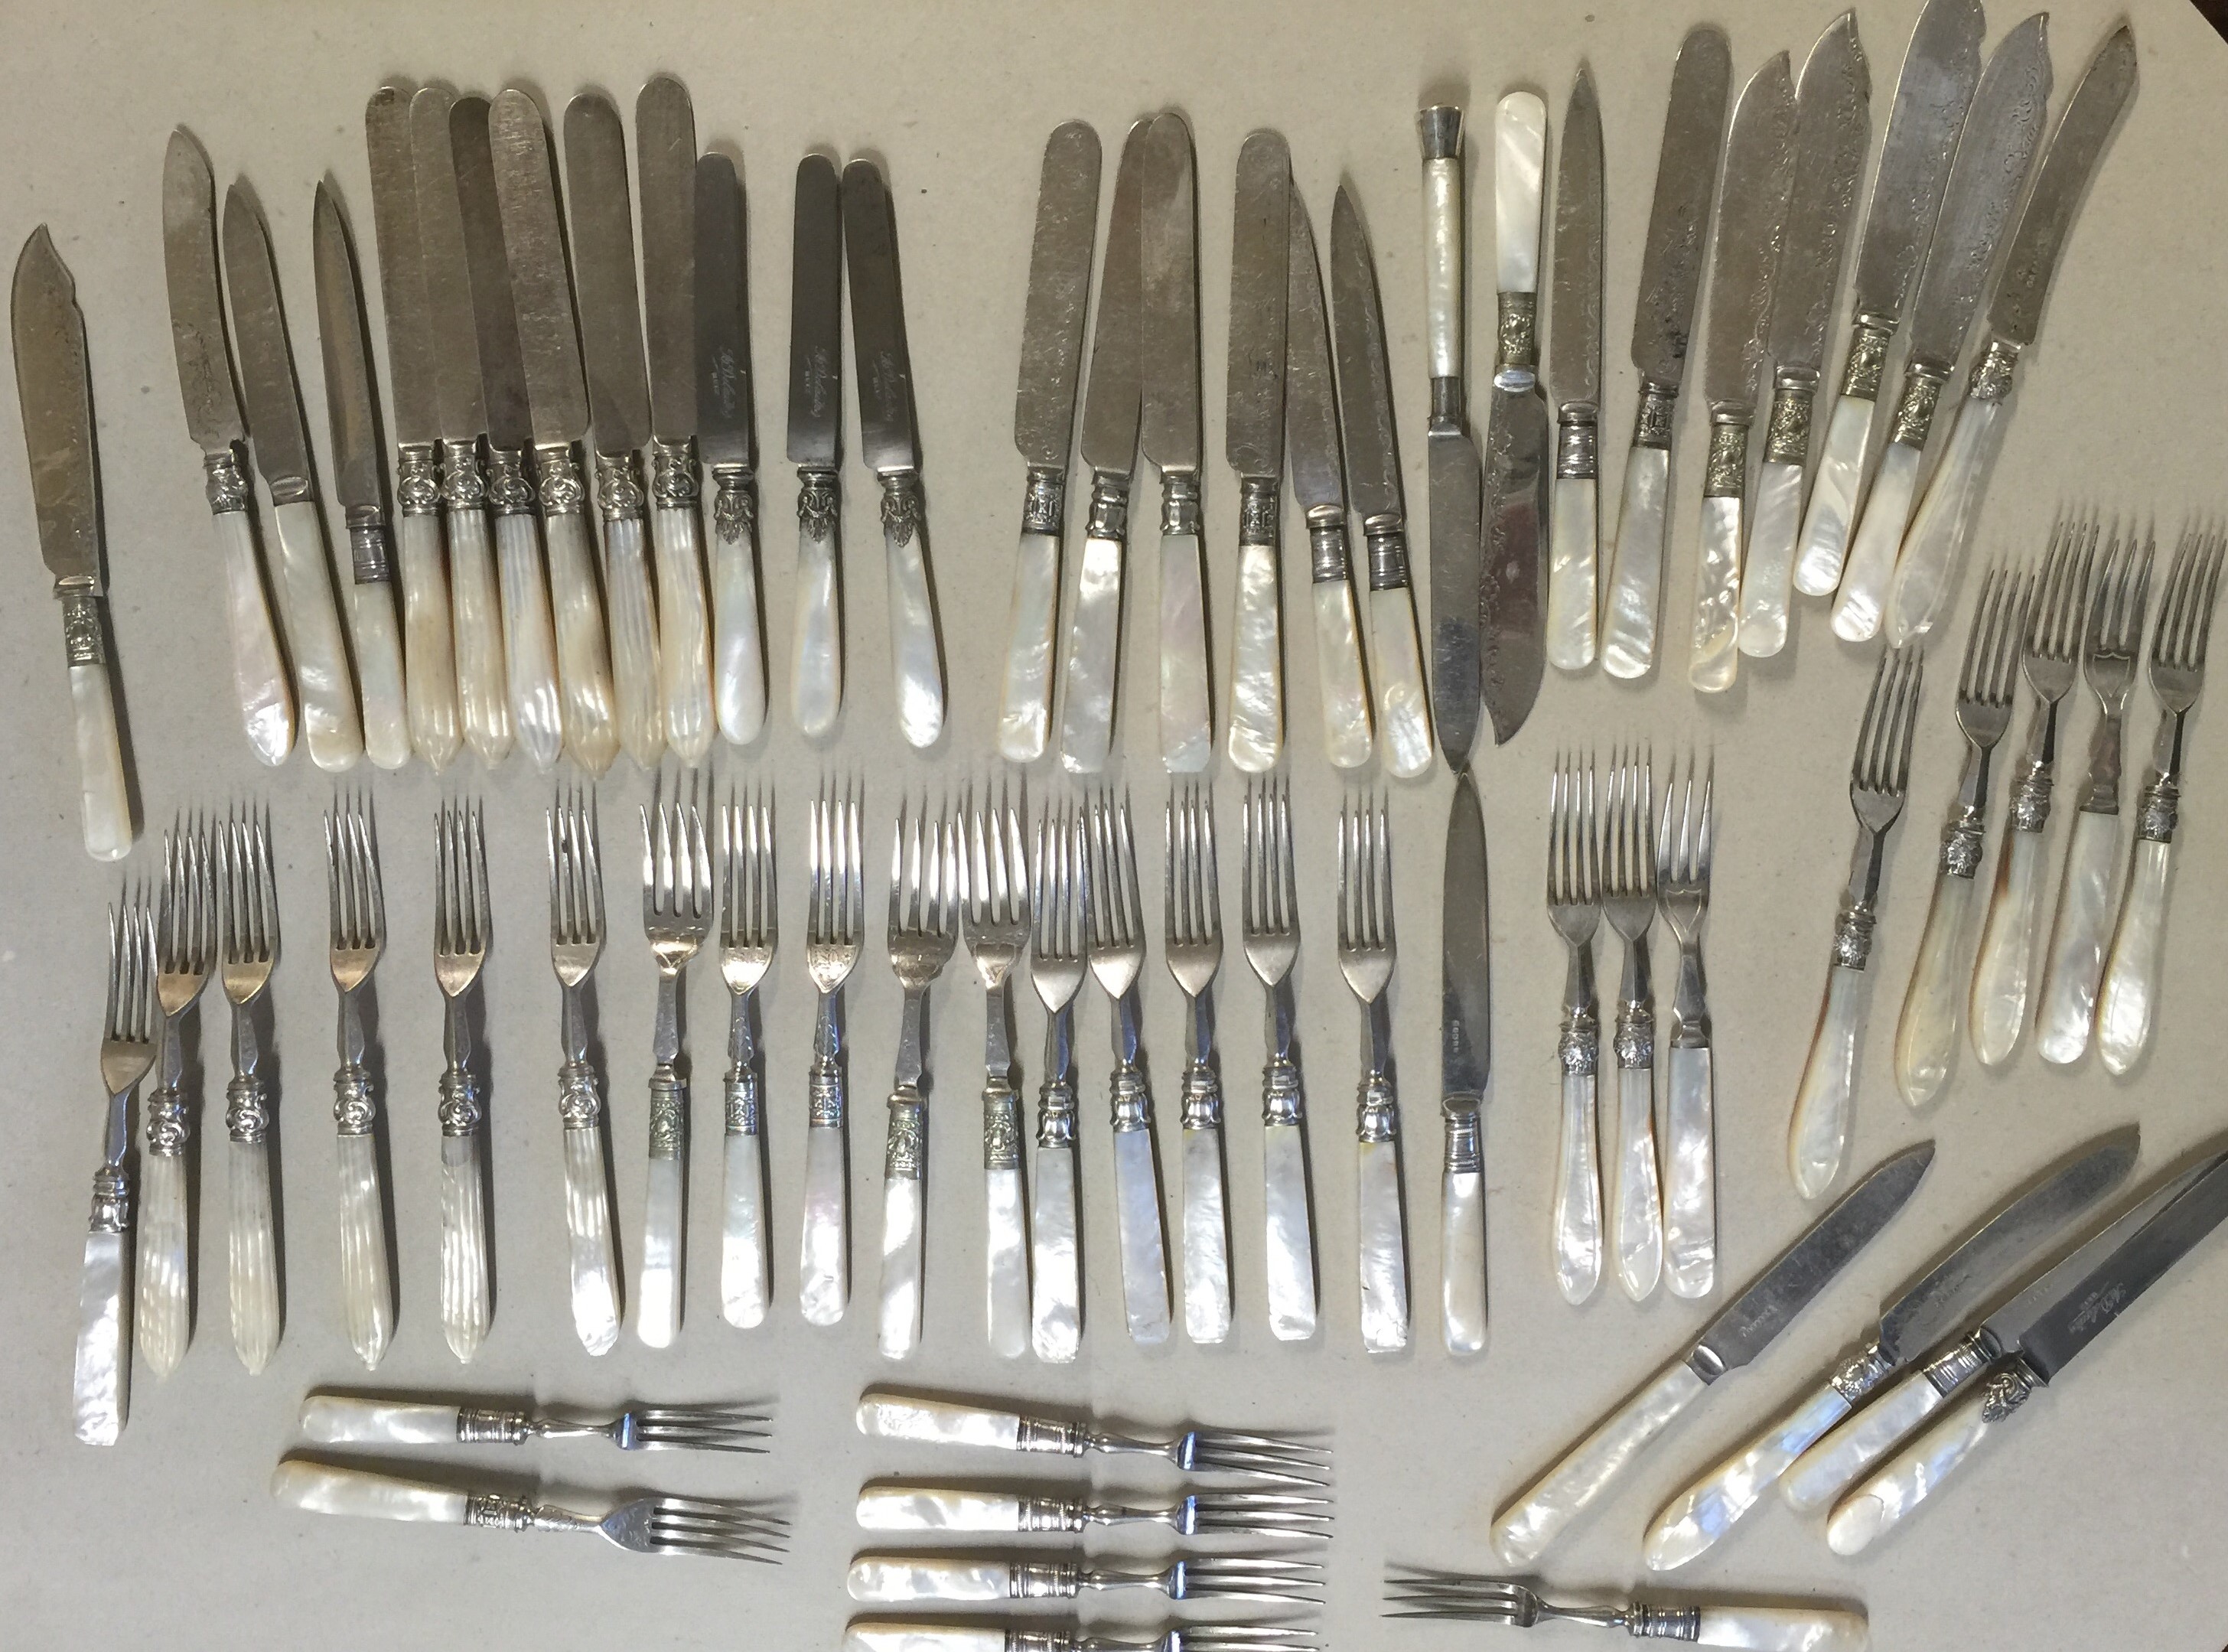 A LARGE COLLECTION OF VICTORIAN/EDWARDIAN MOTHER OF PEARL HANDLED CUTLERY.